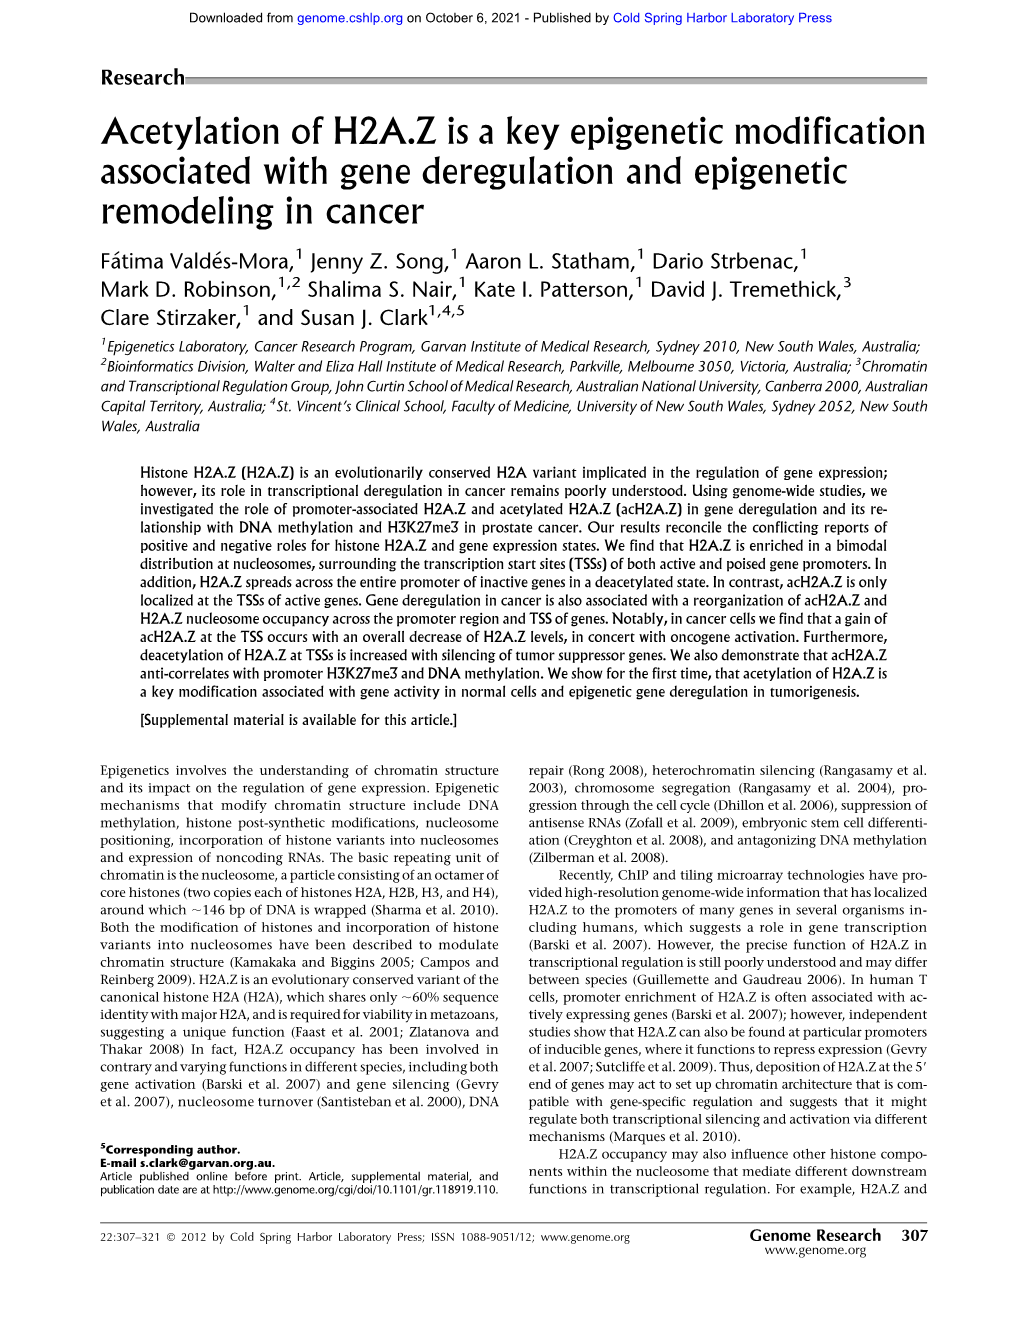 Acetylation of H2A.Z Is a Key Epigenetic Modification Associated with Gene Deregulation and Epigenetic Remodeling in Cancer